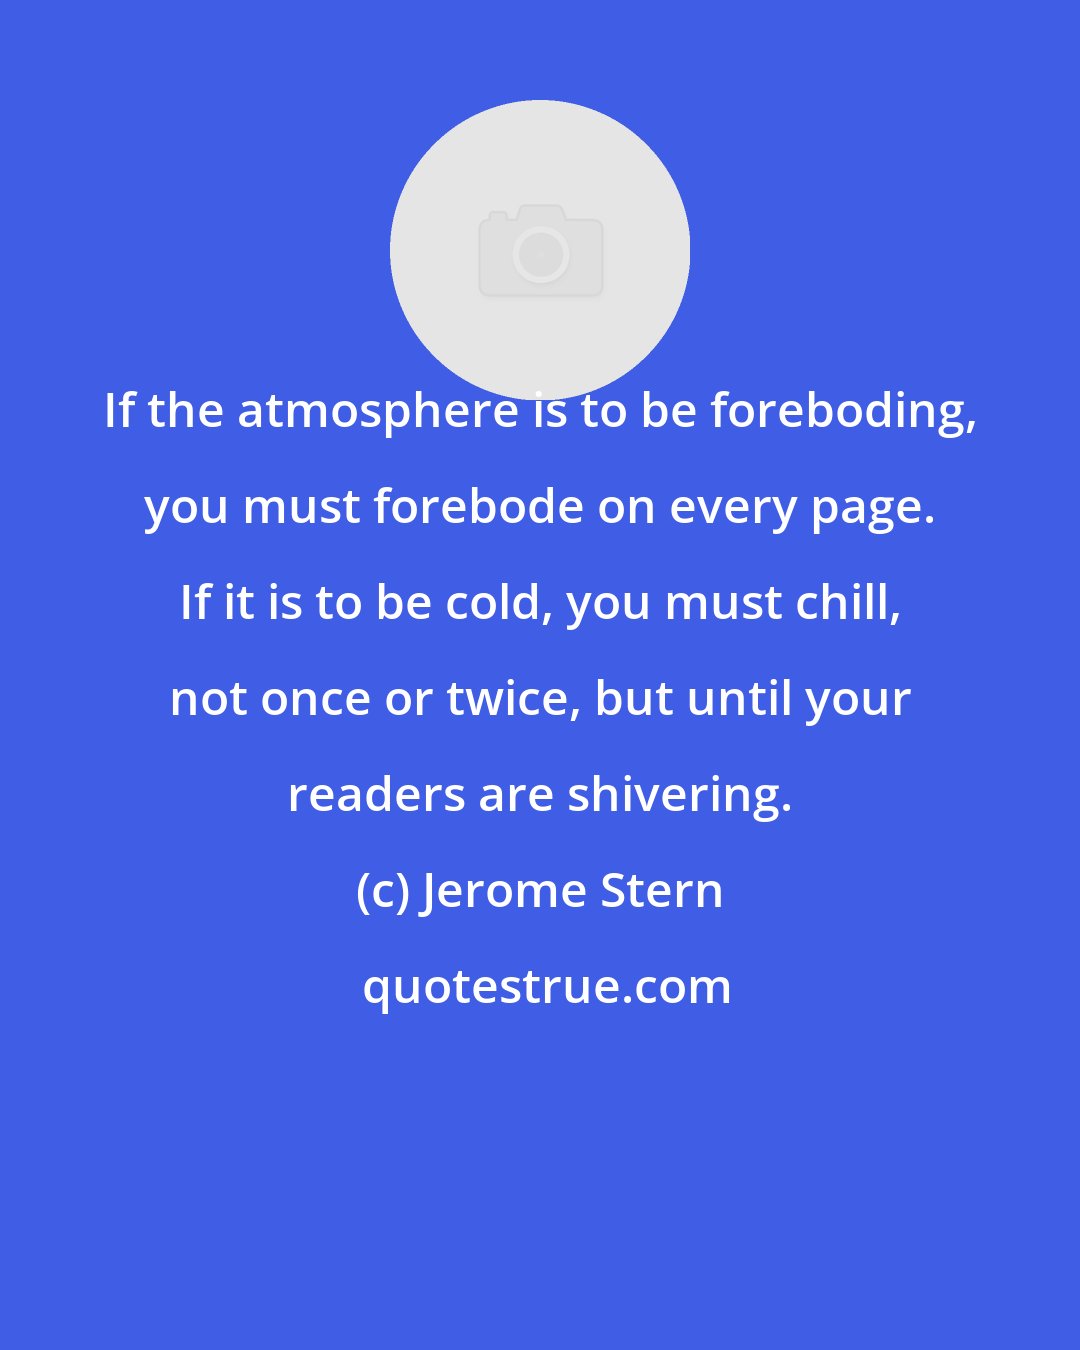 Jerome Stern: If the atmosphere is to be foreboding, you must forebode on every page. If it is to be cold, you must chill, not once or twice, but until your readers are shivering.